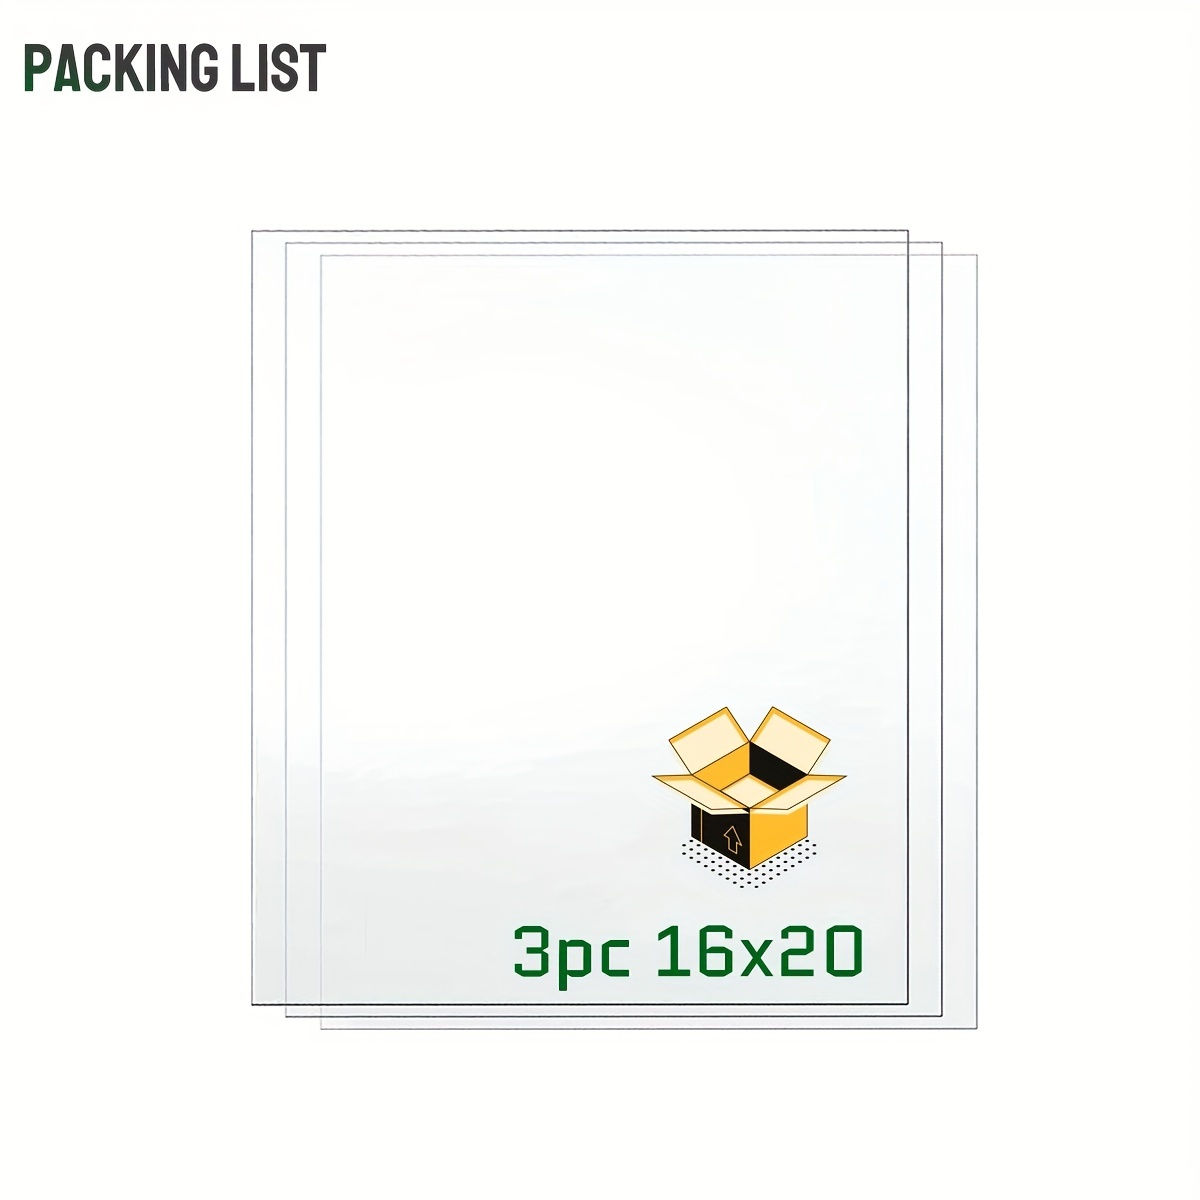 Bedexut 20 Pack 5x7 Plexiglass Sheet 1mm Thick, Clear PETG Panels for  Craft Projects,Replacement Picture Frame Glass and Resin Art - Cricut  Cutting Special Signs for Wedding,Festival,Party,Office. 5x7 - ( 20 Pack )